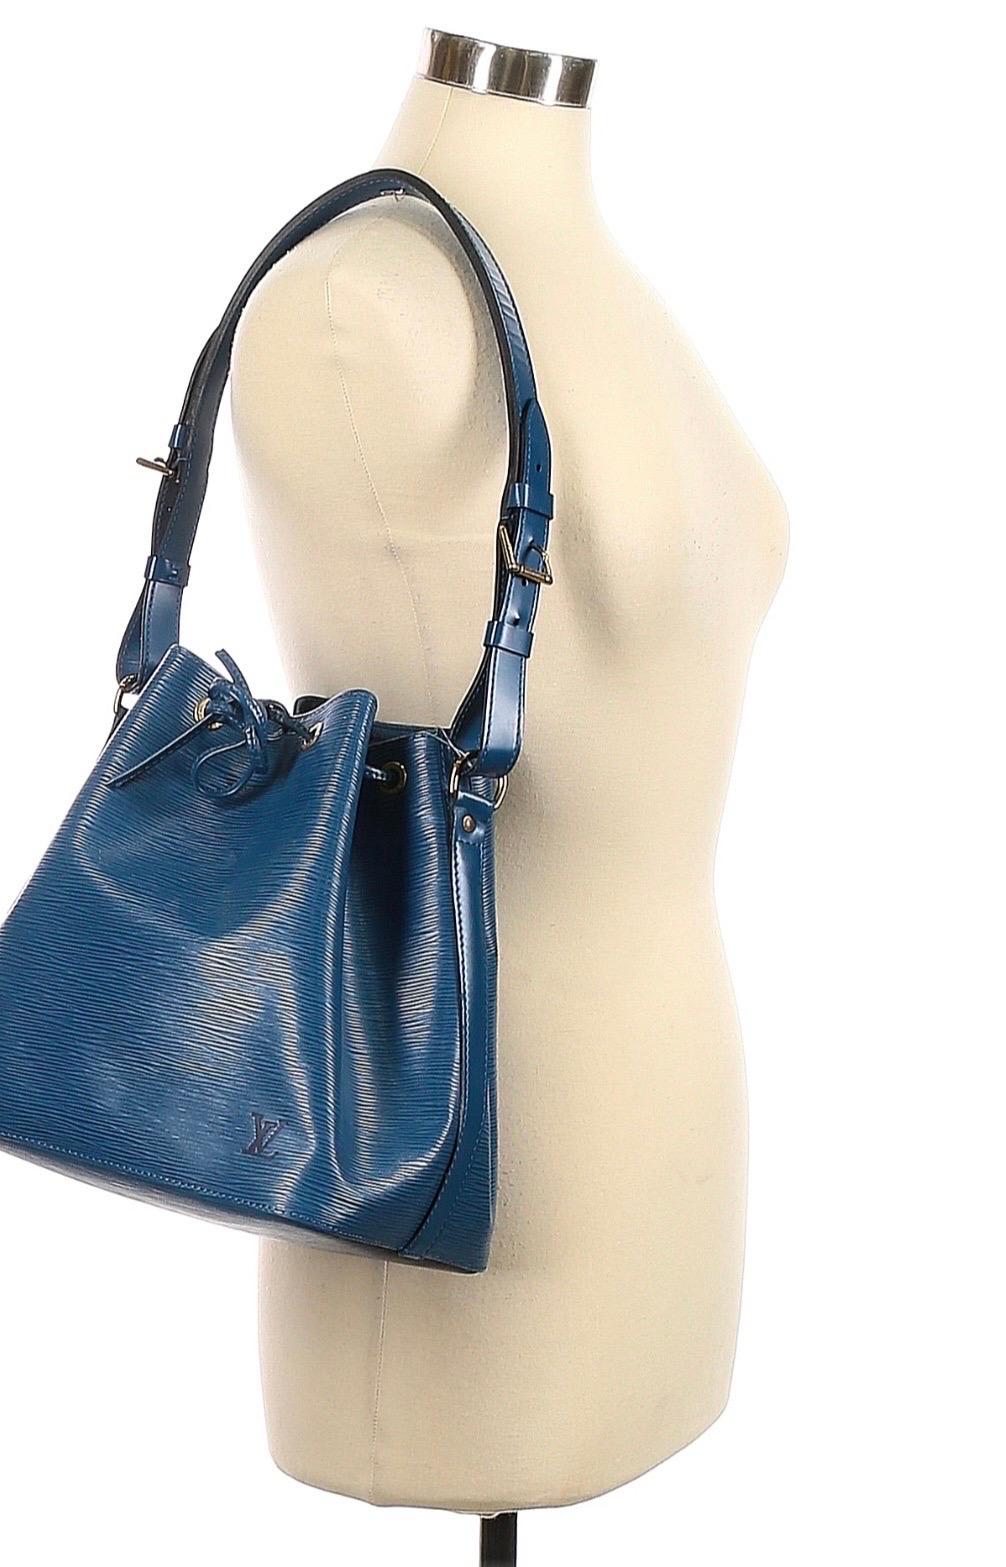 If there are any unspoken accessorizing rules, it's that a bucket bag is a must in any wardrobe. This petite Noé silhouette by Louis Vuitton is cut from blue Epi leather with gold-tone hardware for subtle shine. Loosen the drawstring to reveal a